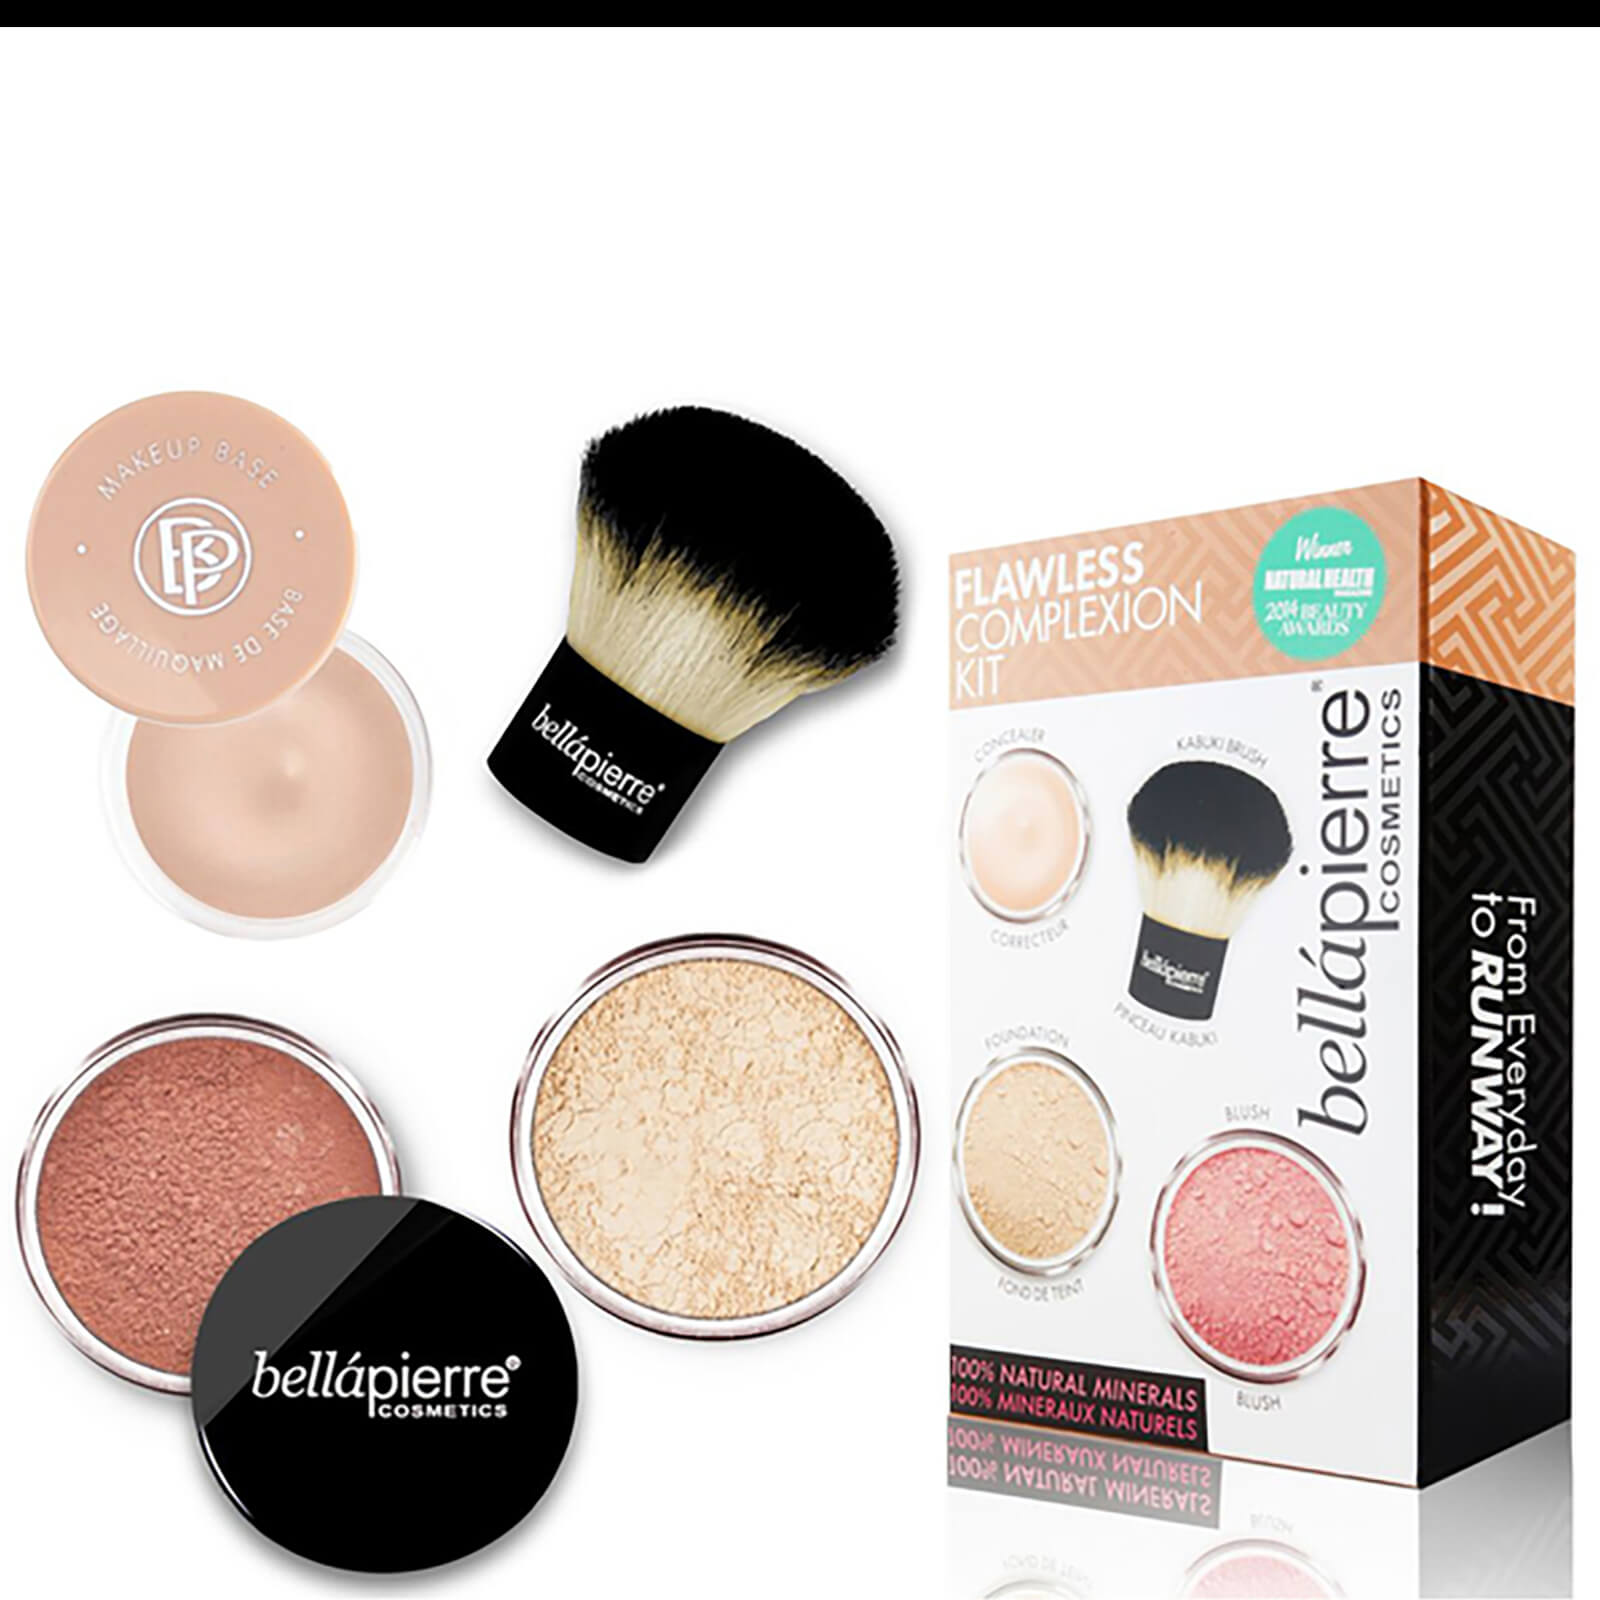 Image of Bellápierre Cosmetics Flawless Complexion Kit - Fair